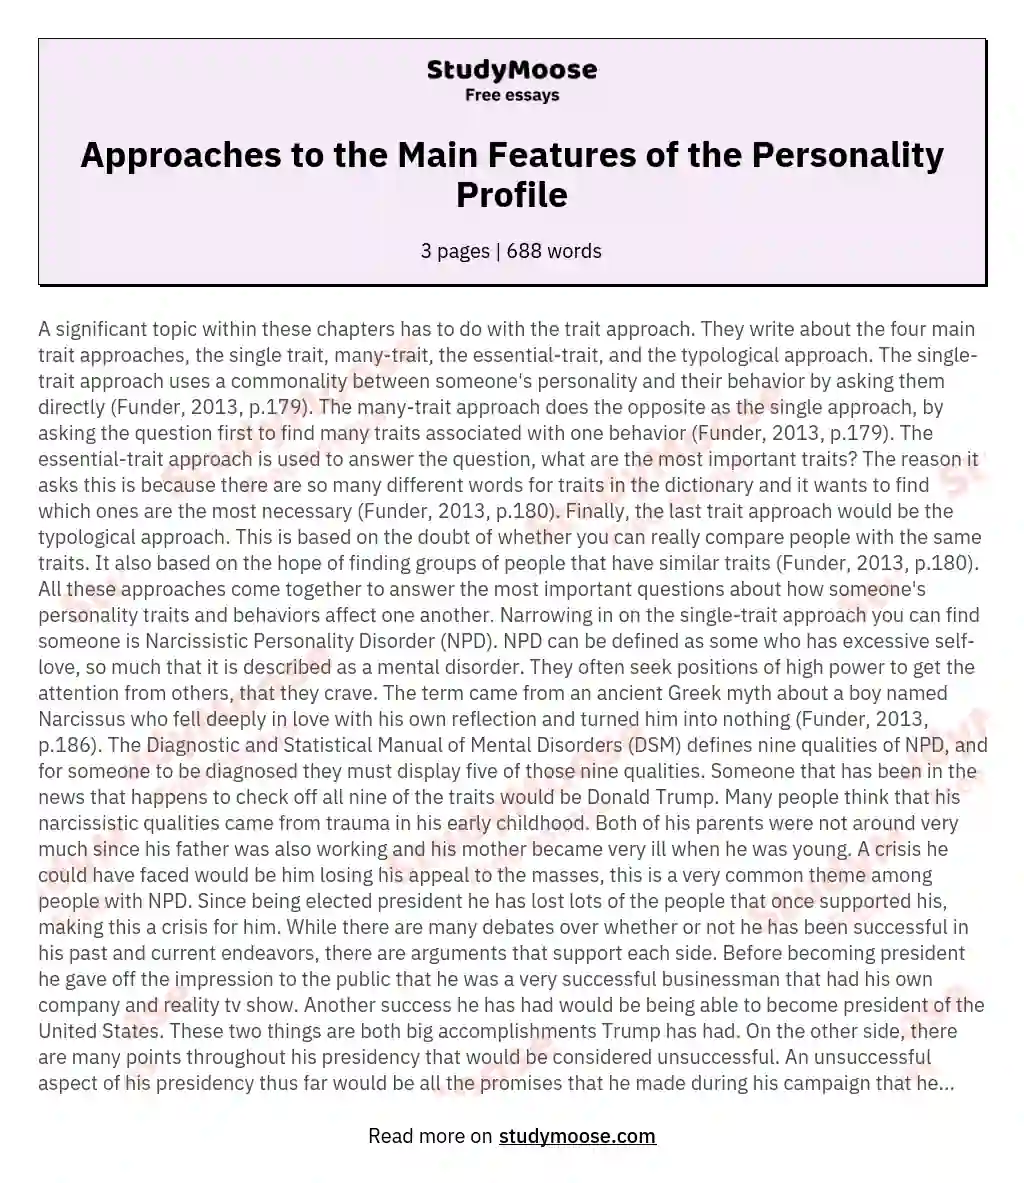 Approaches to the Main Features of the Personality Profile essay